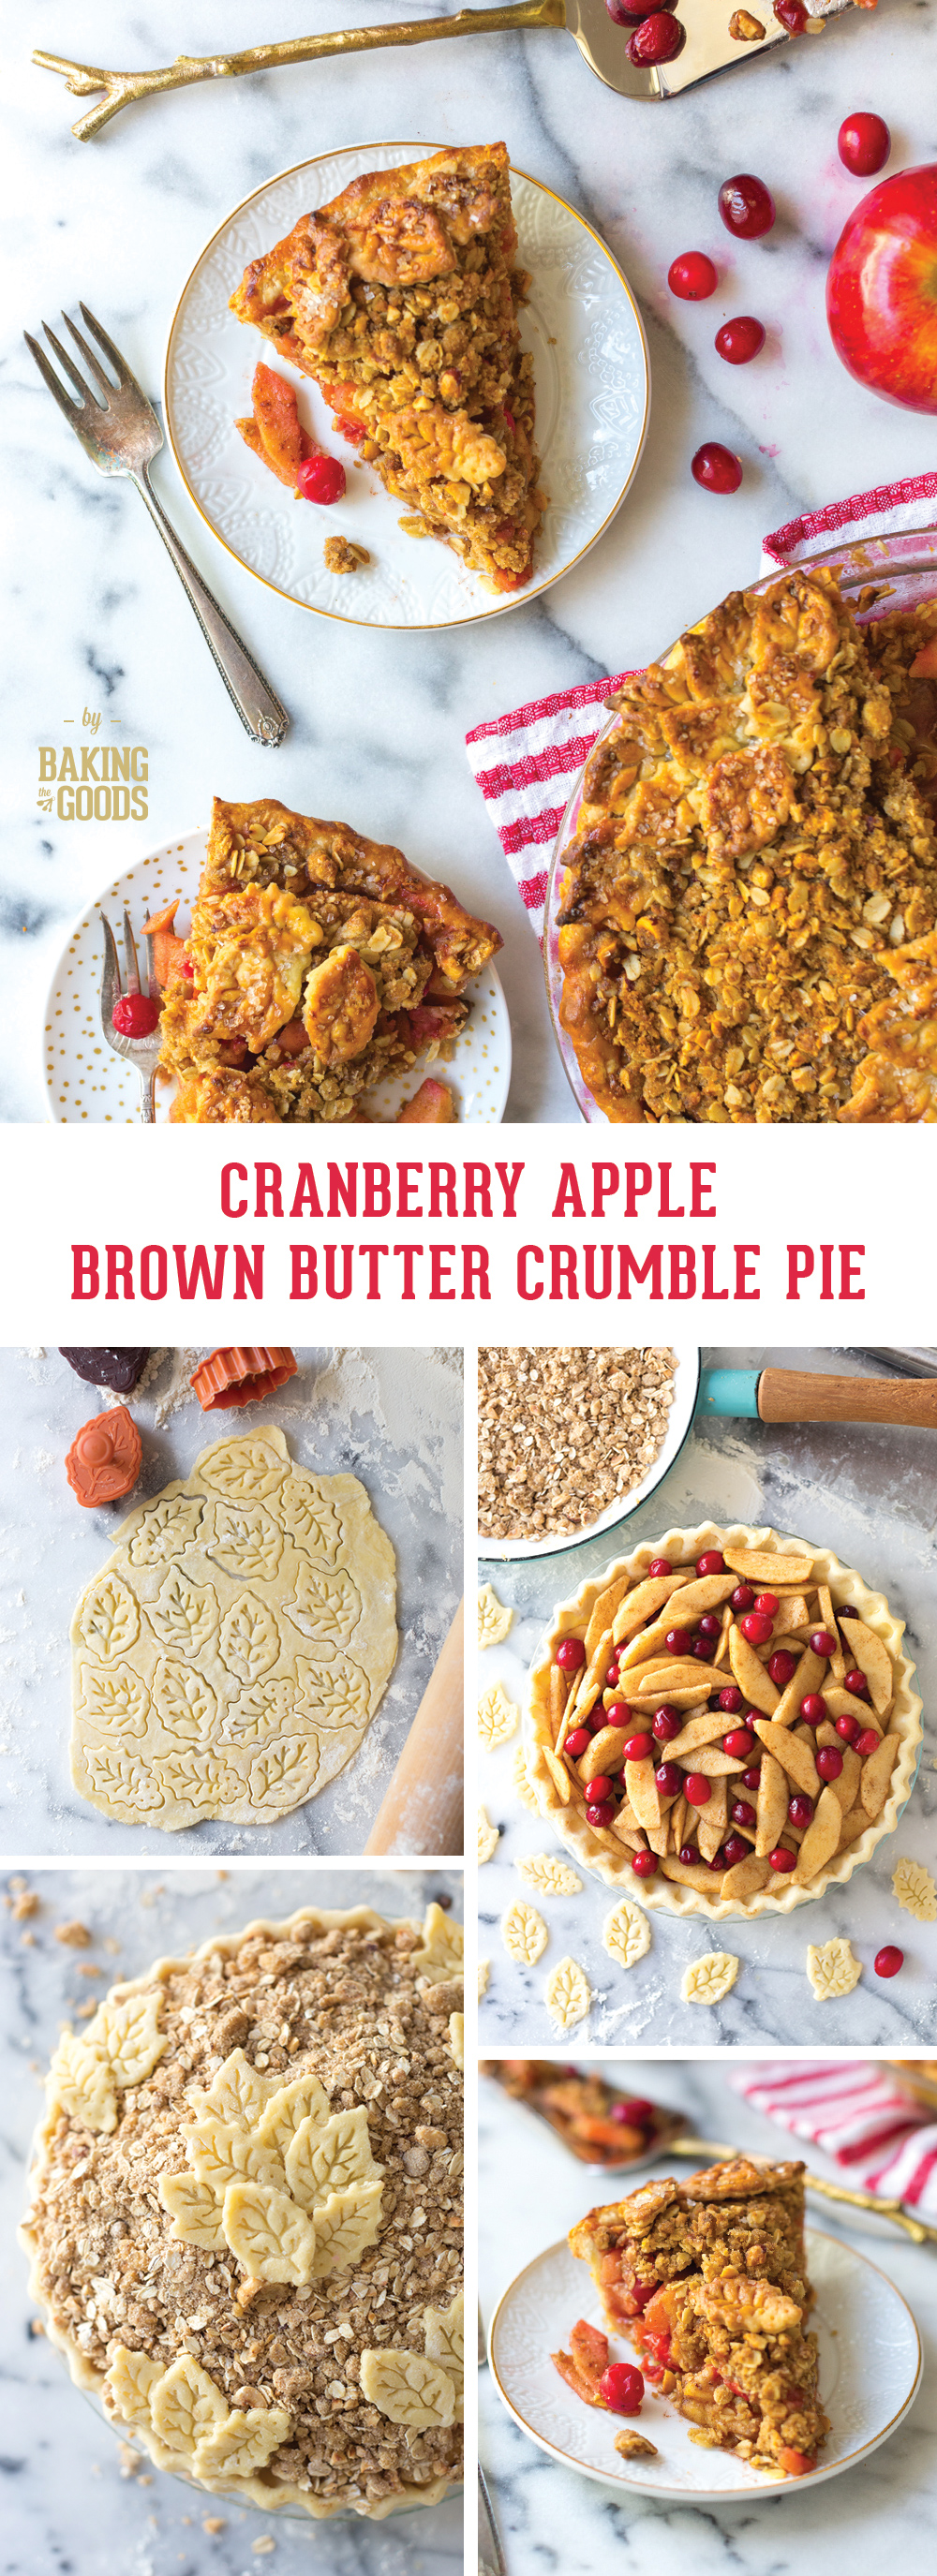 Cranberry Apple Brown Butter Crumble Pie by Baking The Goods